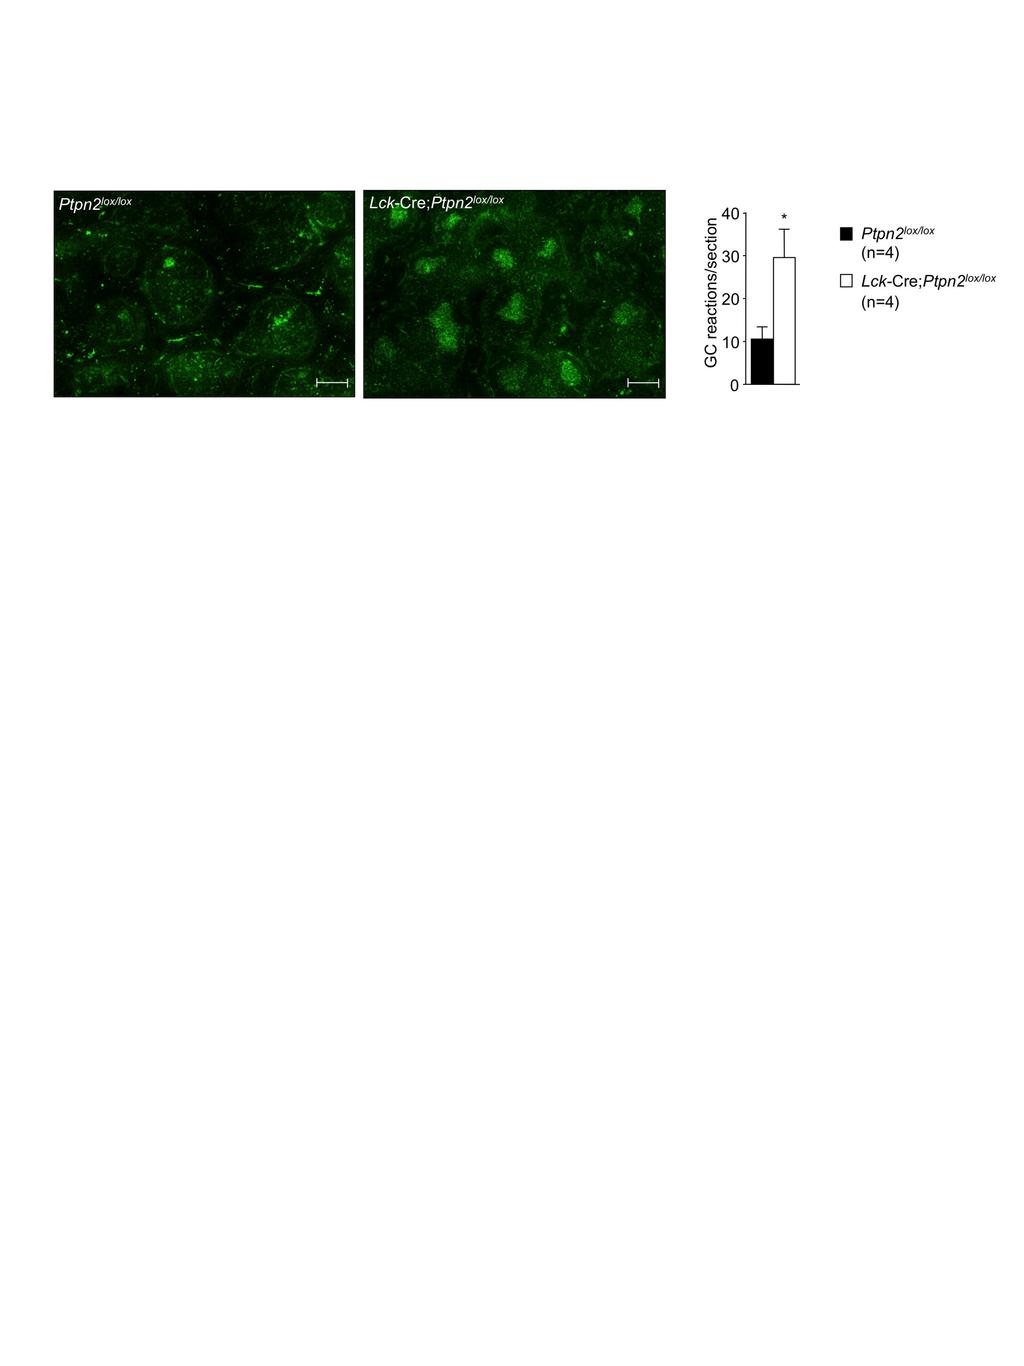 Supplementary Figure 14. Enhanced germinal centre reaction in 40 week old Lck-Cre;Ptpn2 lox/lox mice.